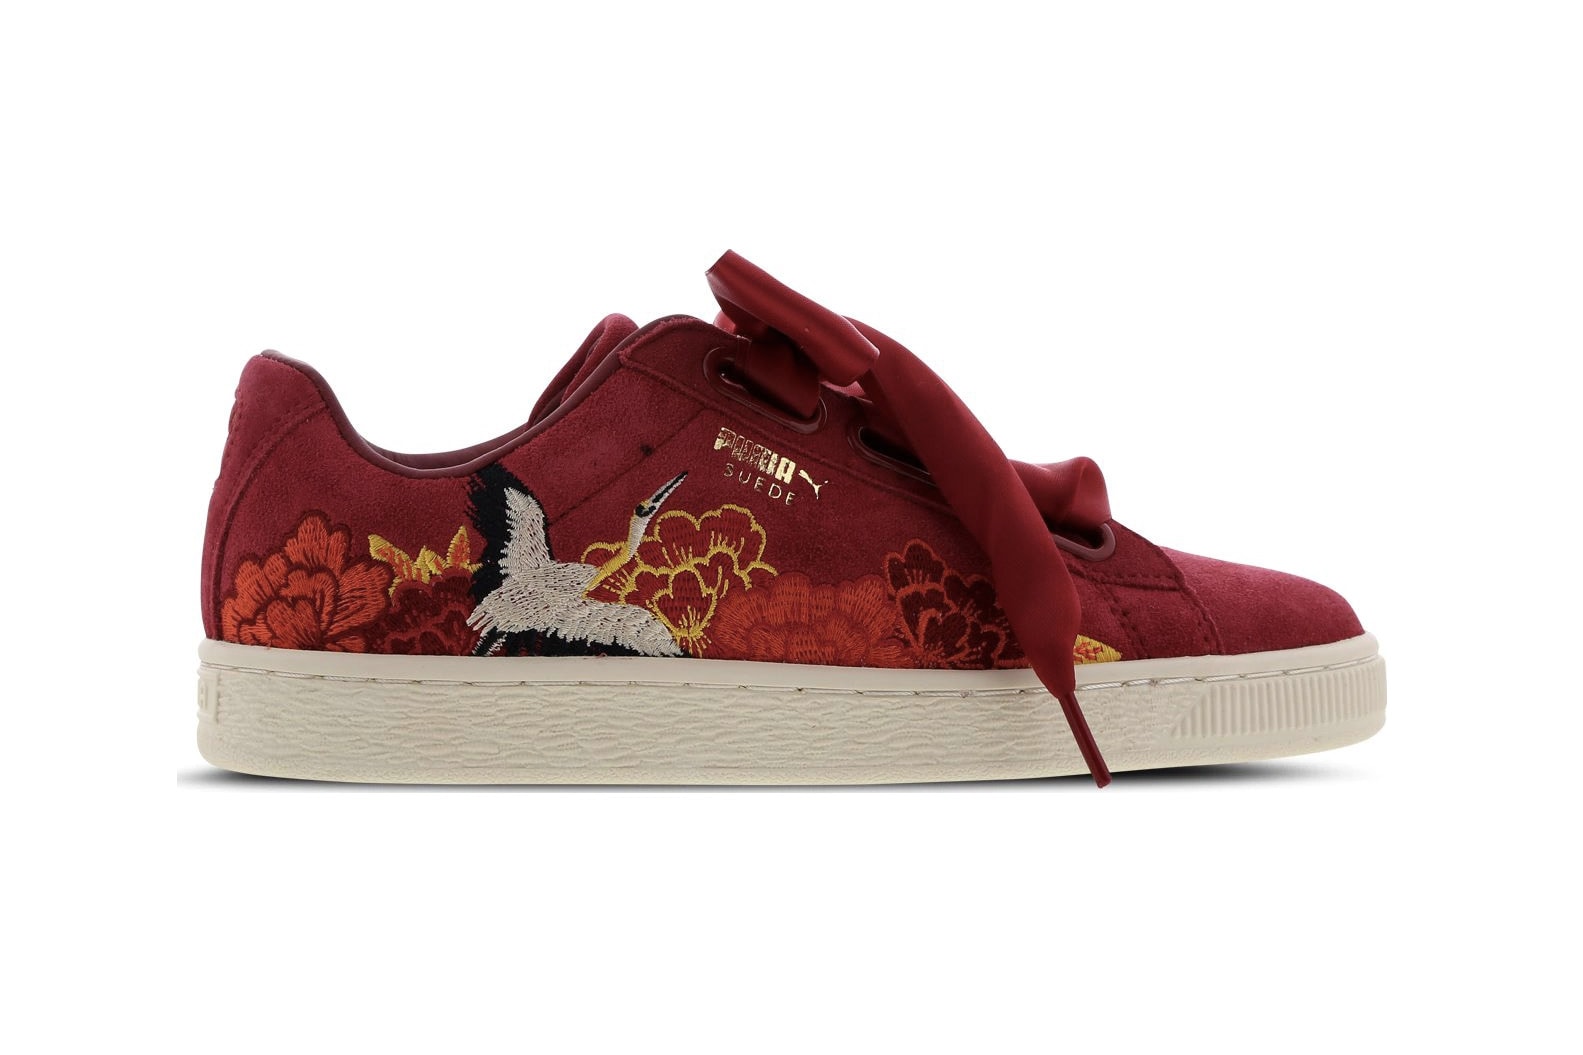 PUMA Suede Heart Kimono Embroidered Red White Japanese Floral Crane Sneakers